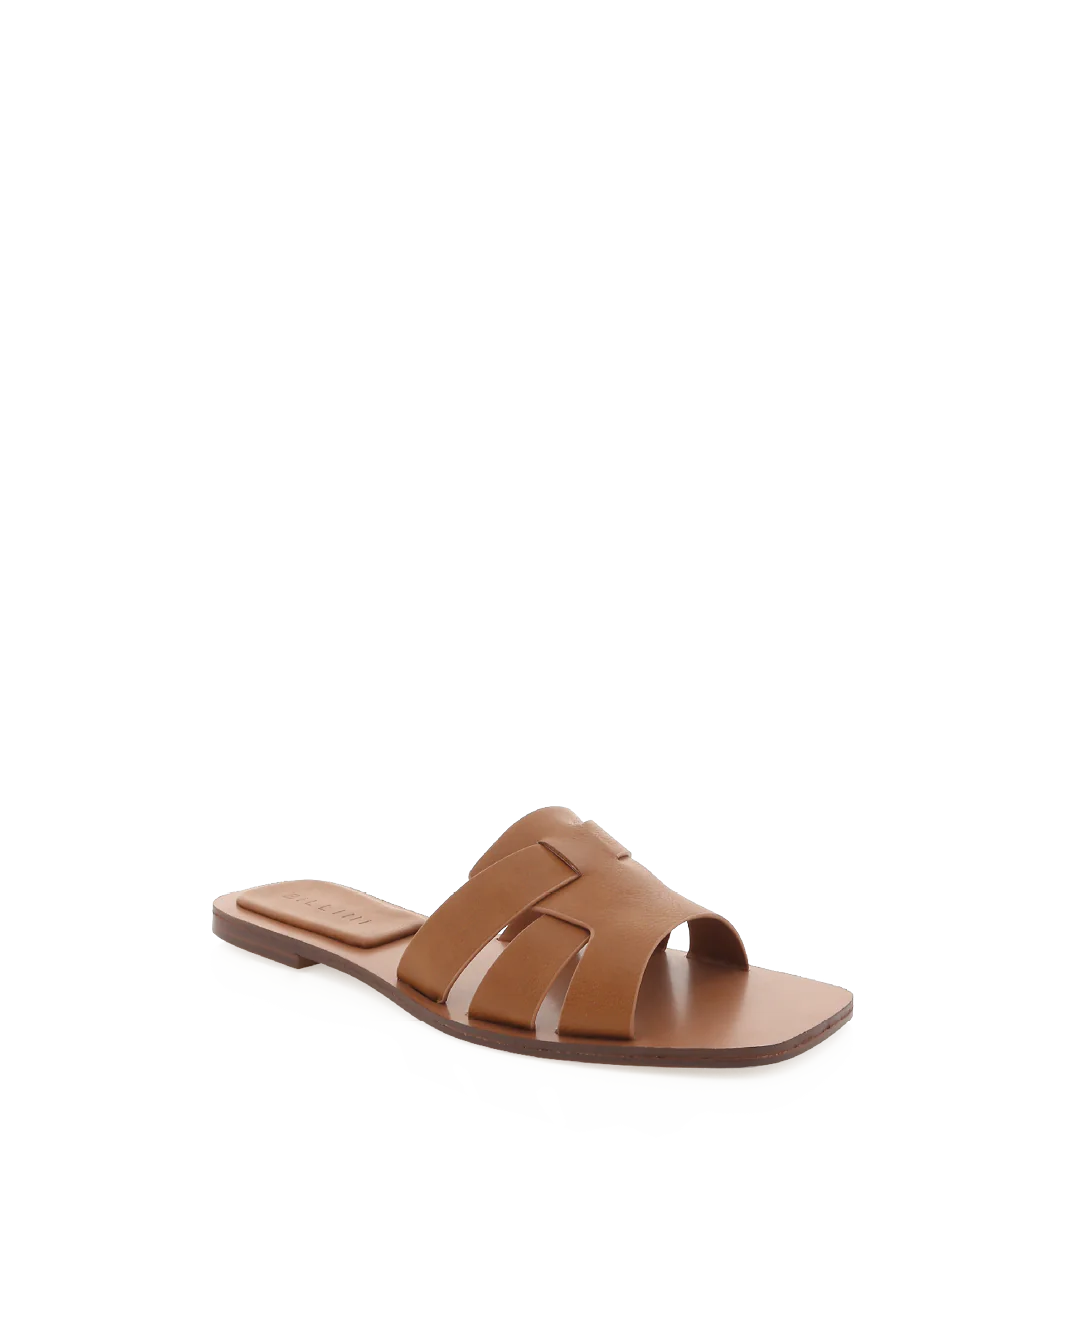 Ferna by Billini is a classic summer slide. Slide into summer with the ultimate easy-to-wear style.